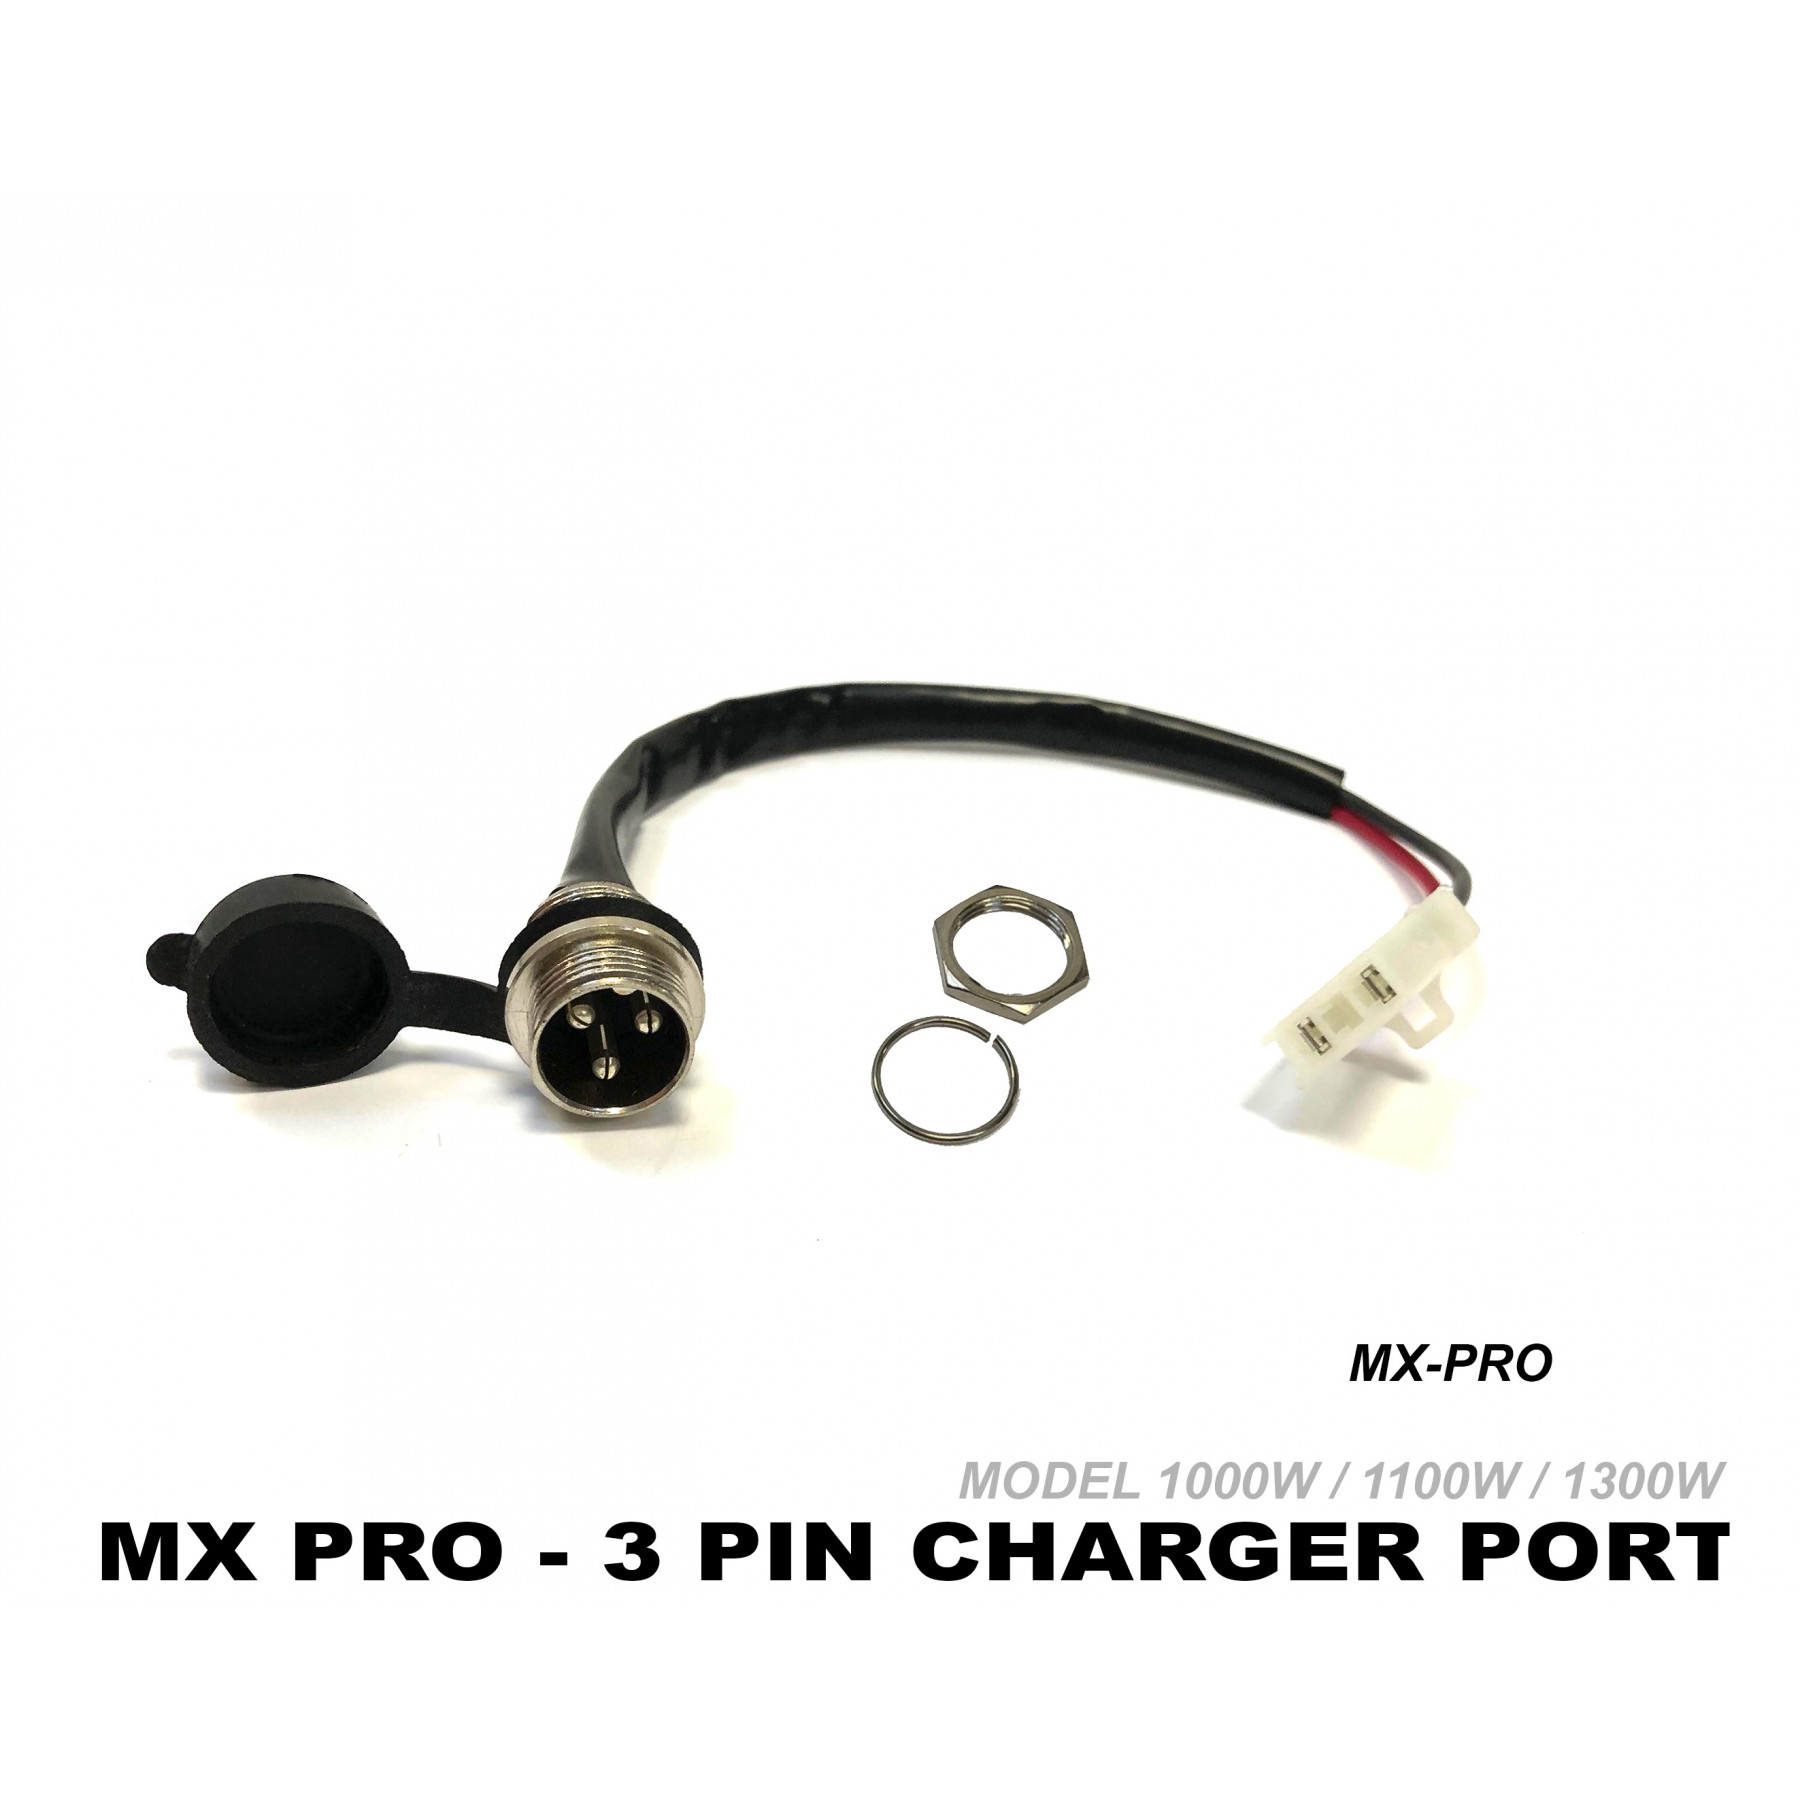 XTREME ELECTRIC XTM MX-PRO 36V REPLACEMENT 3 PIN CHARGER POINT